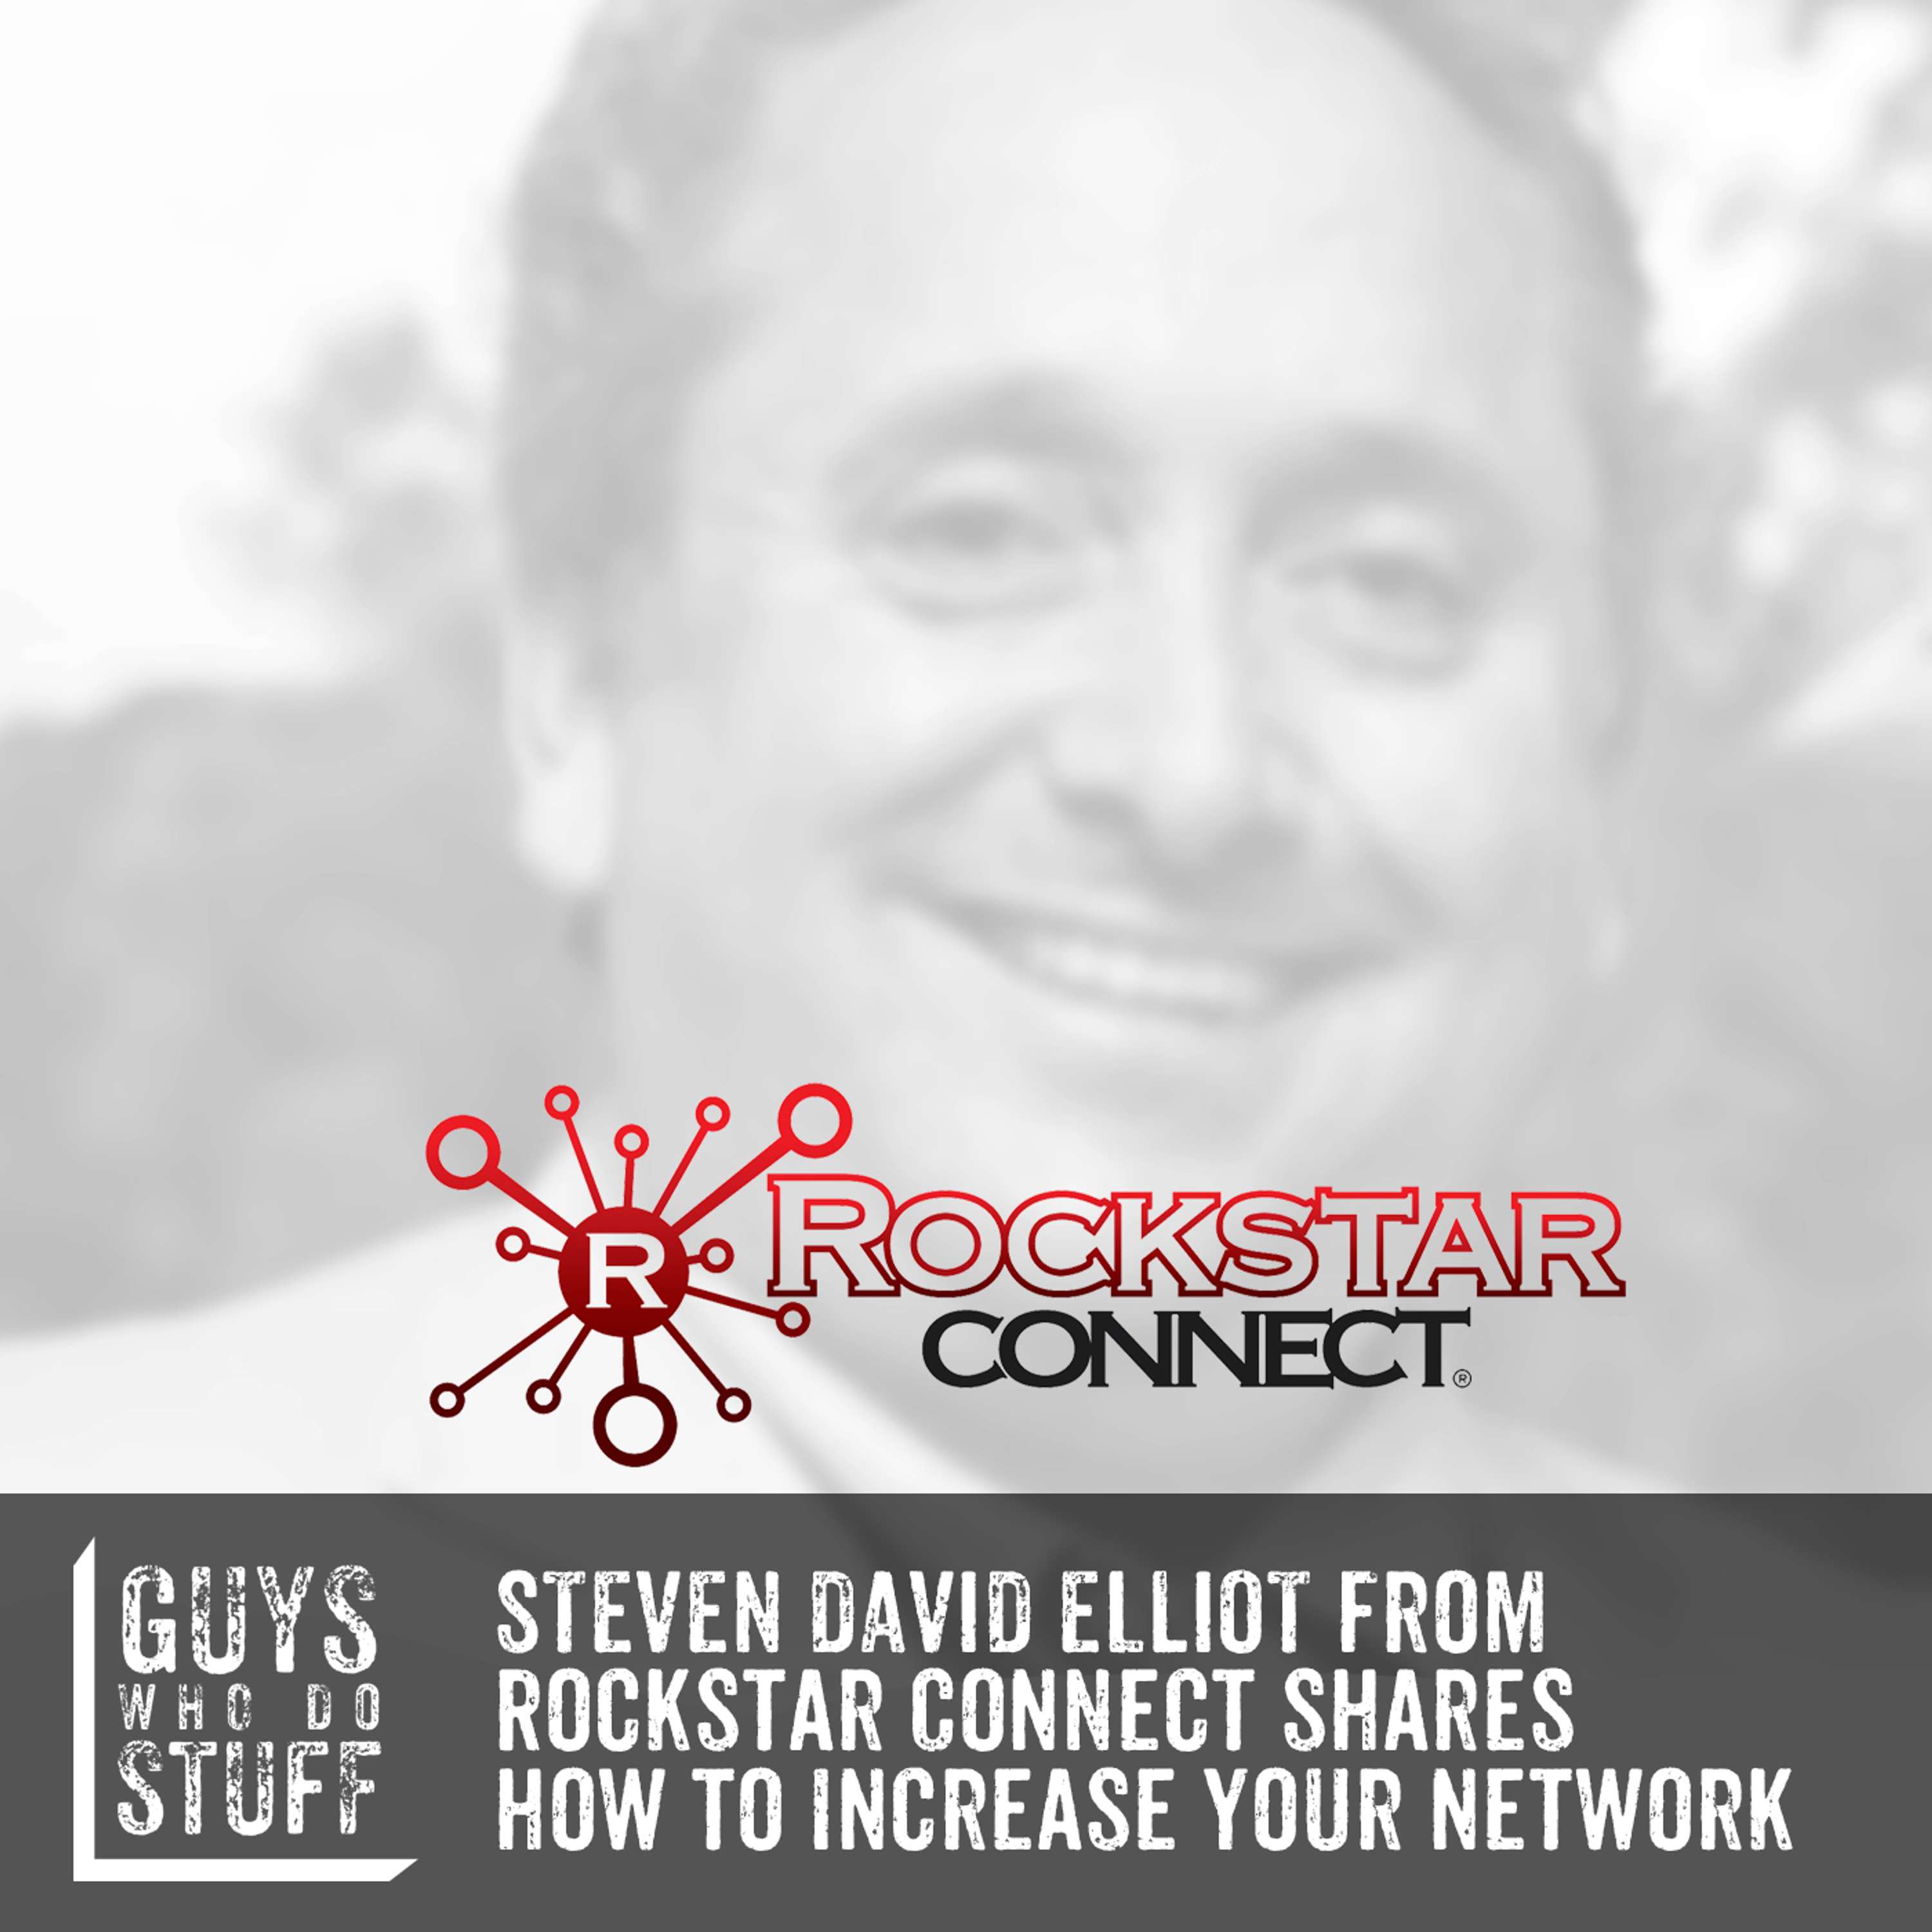 Steven David Elliot from Rockstar Connect shares how to increase your network